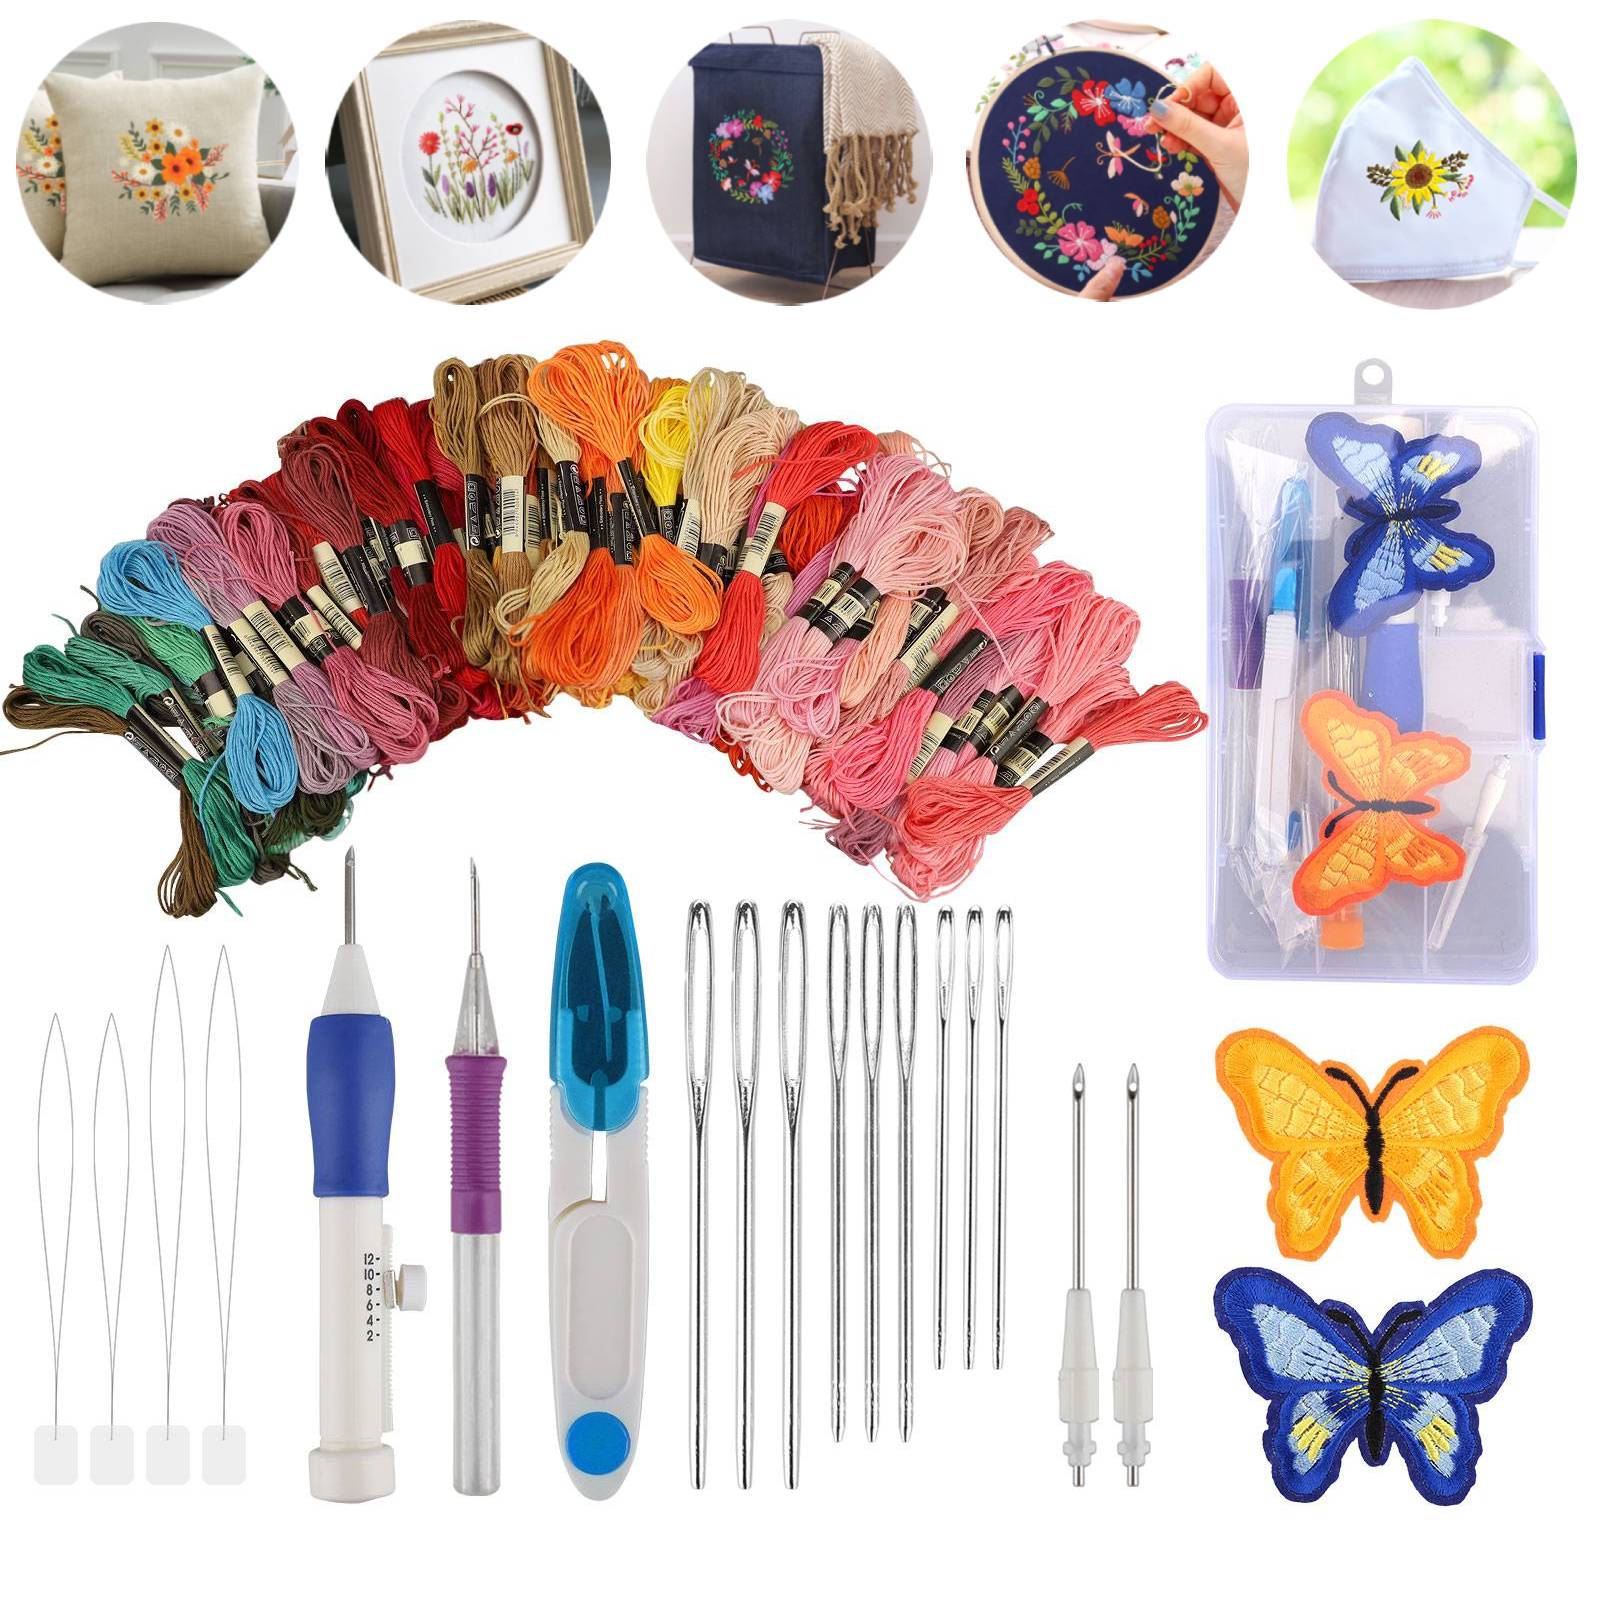 Embroidery Starter Kit, EEEkit Embroidery Pen Set Including Magic  Embroidery Pen Punch Needle, 50pcs Color Threads, Embroidery Needles  Stitching Punch